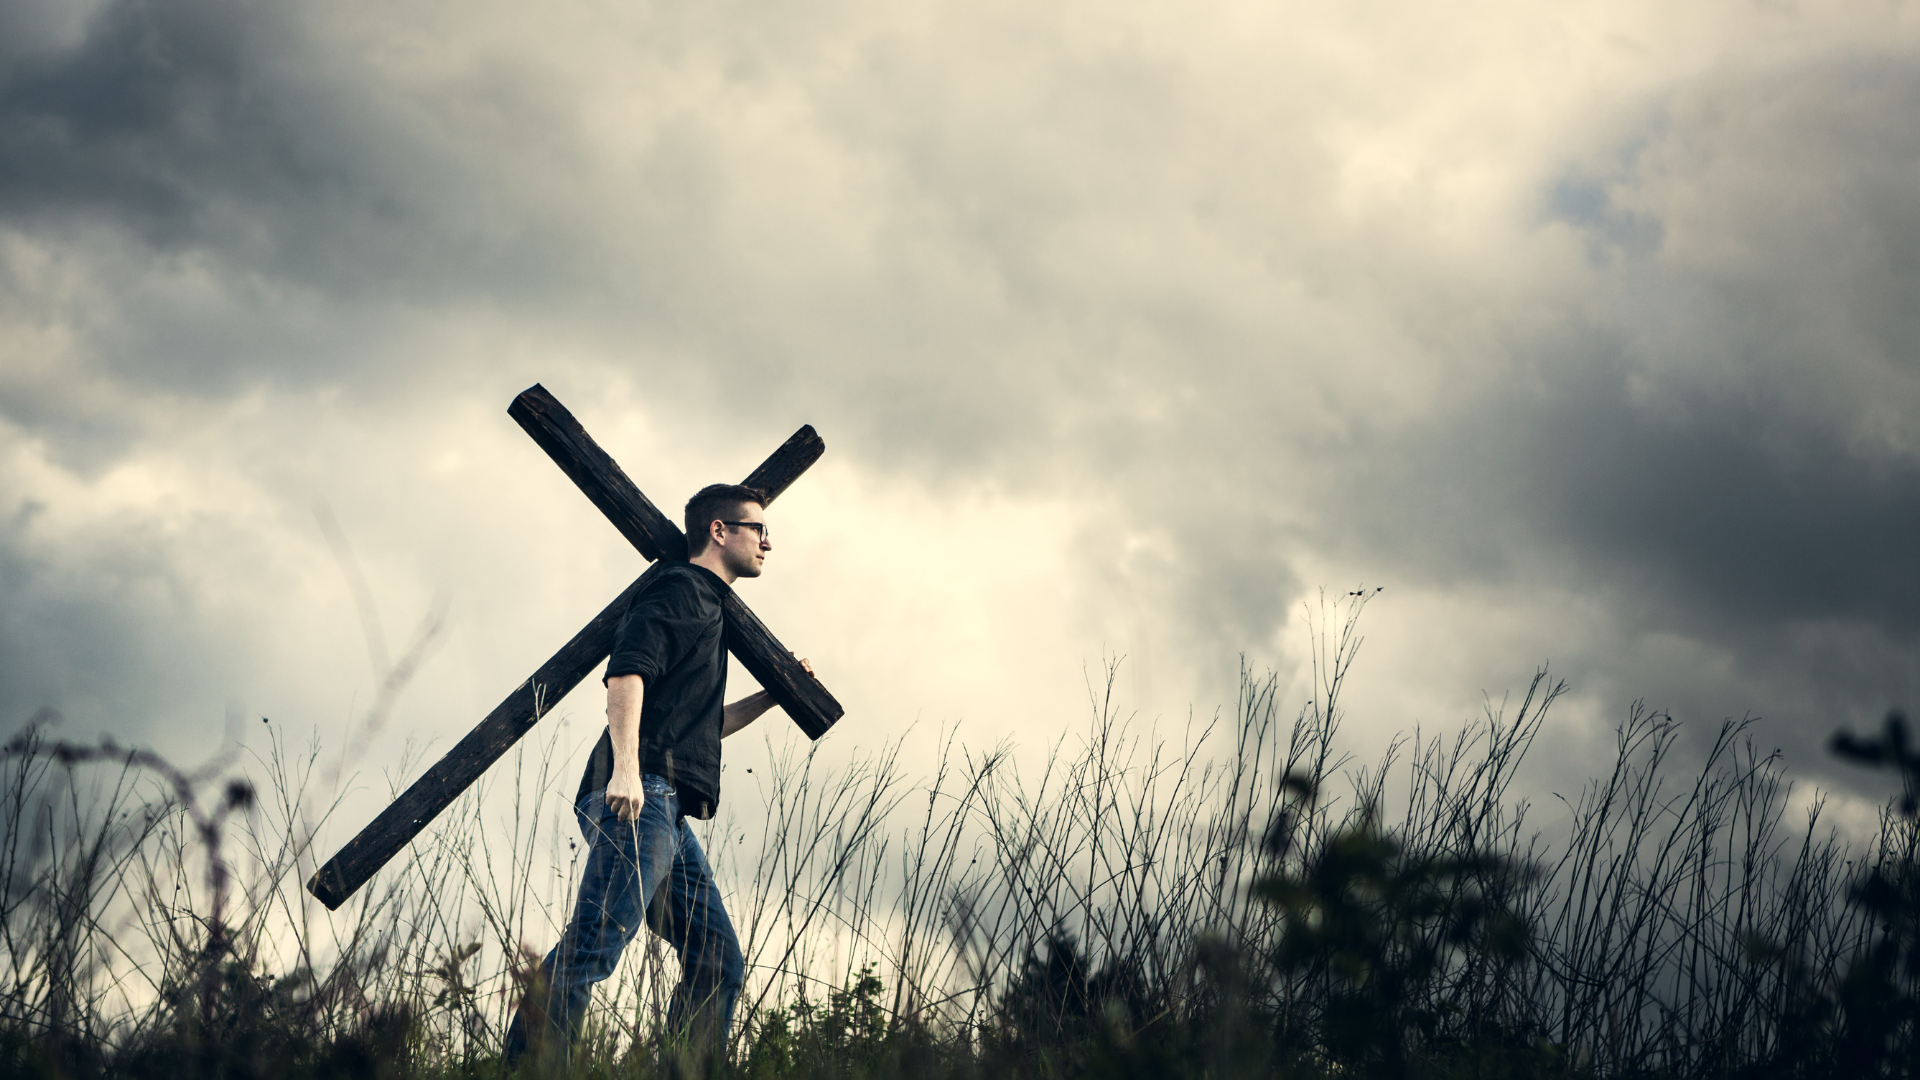 What does it mean to deny yourself, take up your cross daily, and follow Jesus?